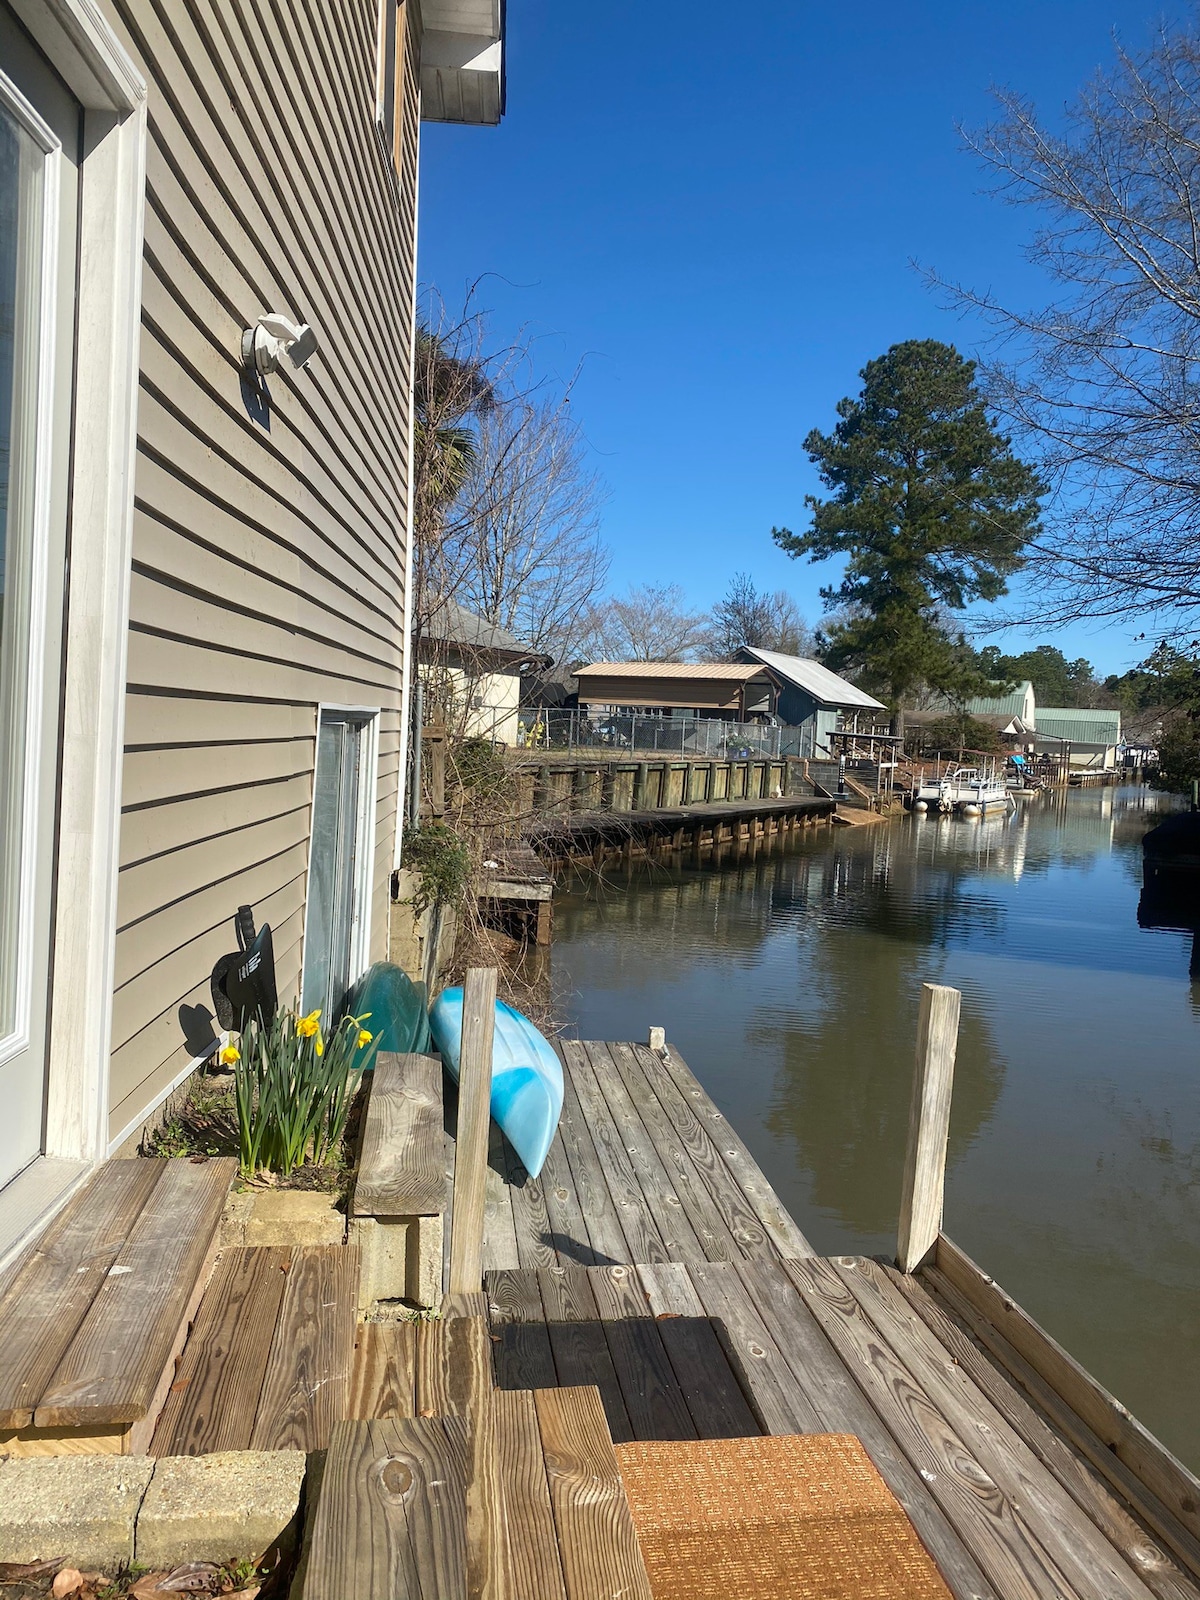 Wally 's Fishing Shanty on the Lake Moultrie Canal